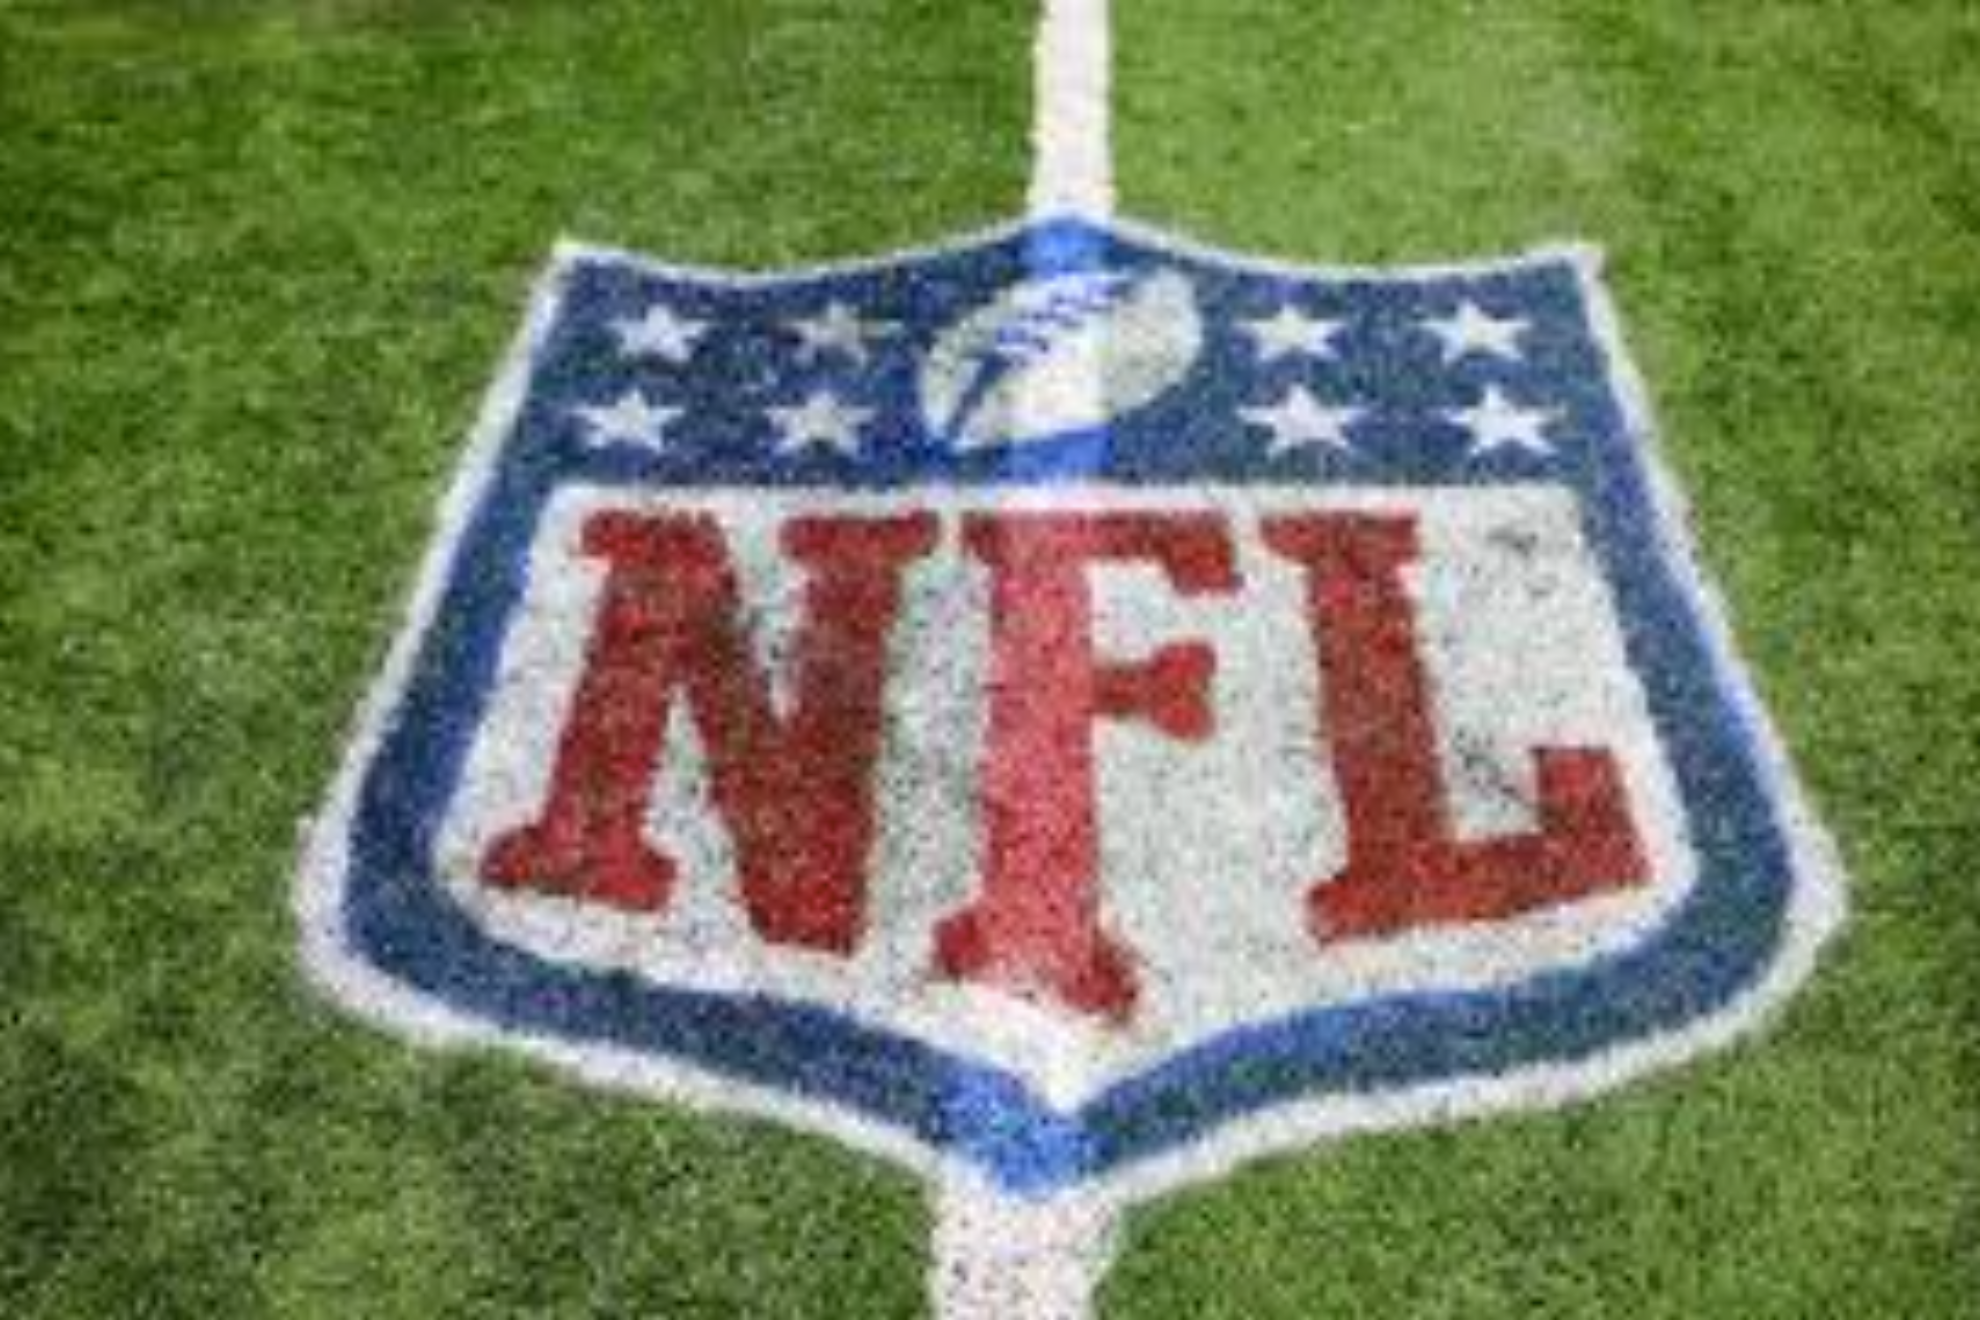 Why did the NFL choose to play Week 1 in Brazil on a Friday?